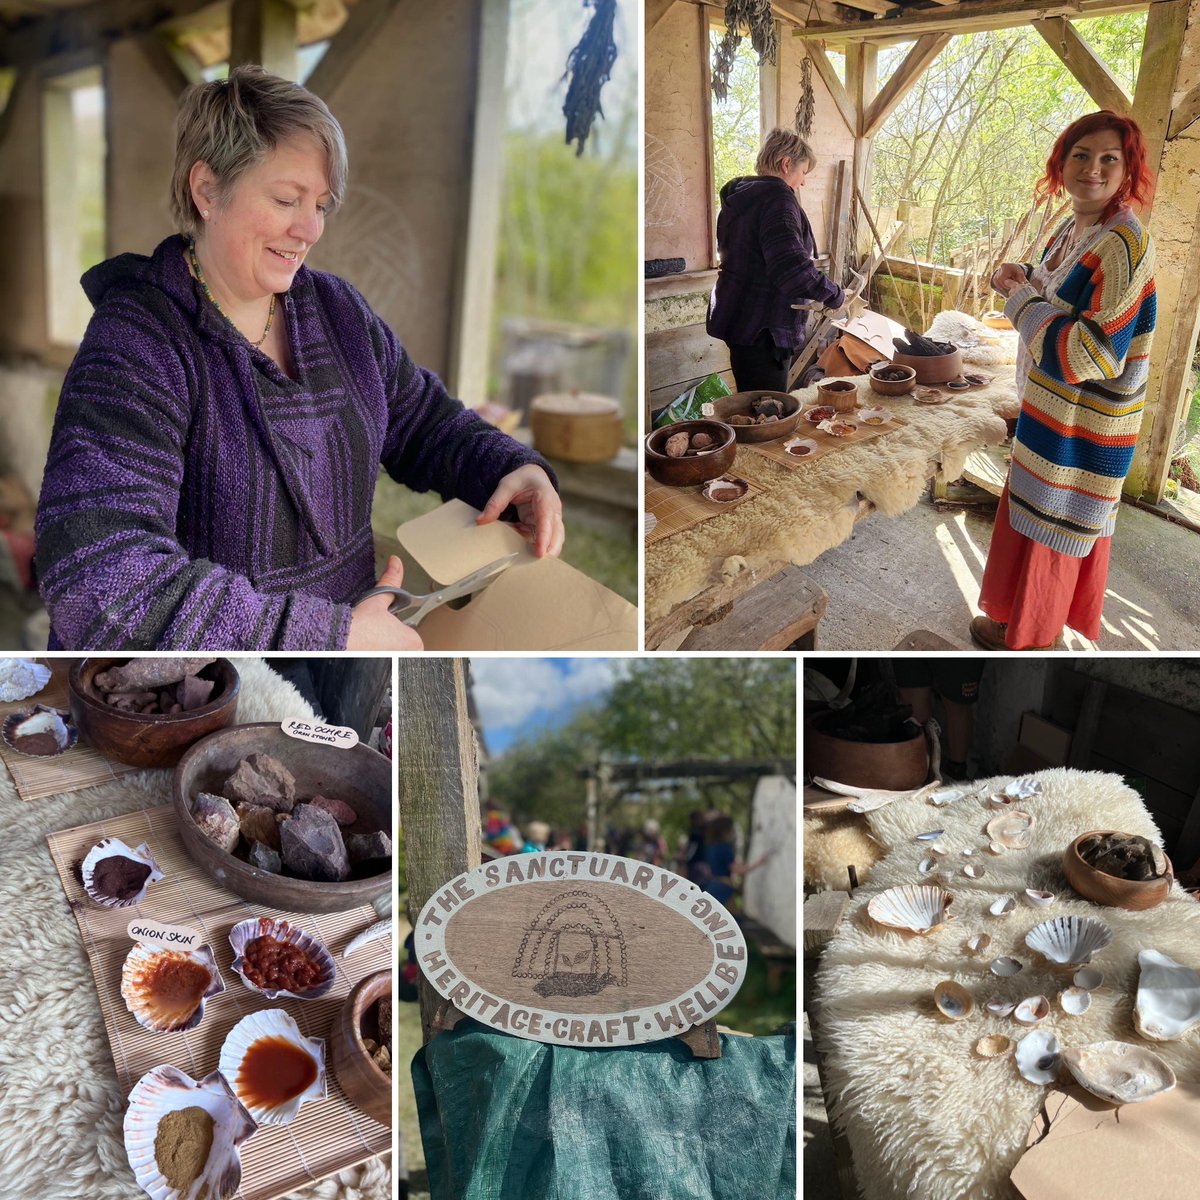 Day 1 @ATCranborne great day supporting Megs and the @th_sanctuary_ On the prehistoric weekend a brilliant activities, reenactors and experimental archaeology 🥰